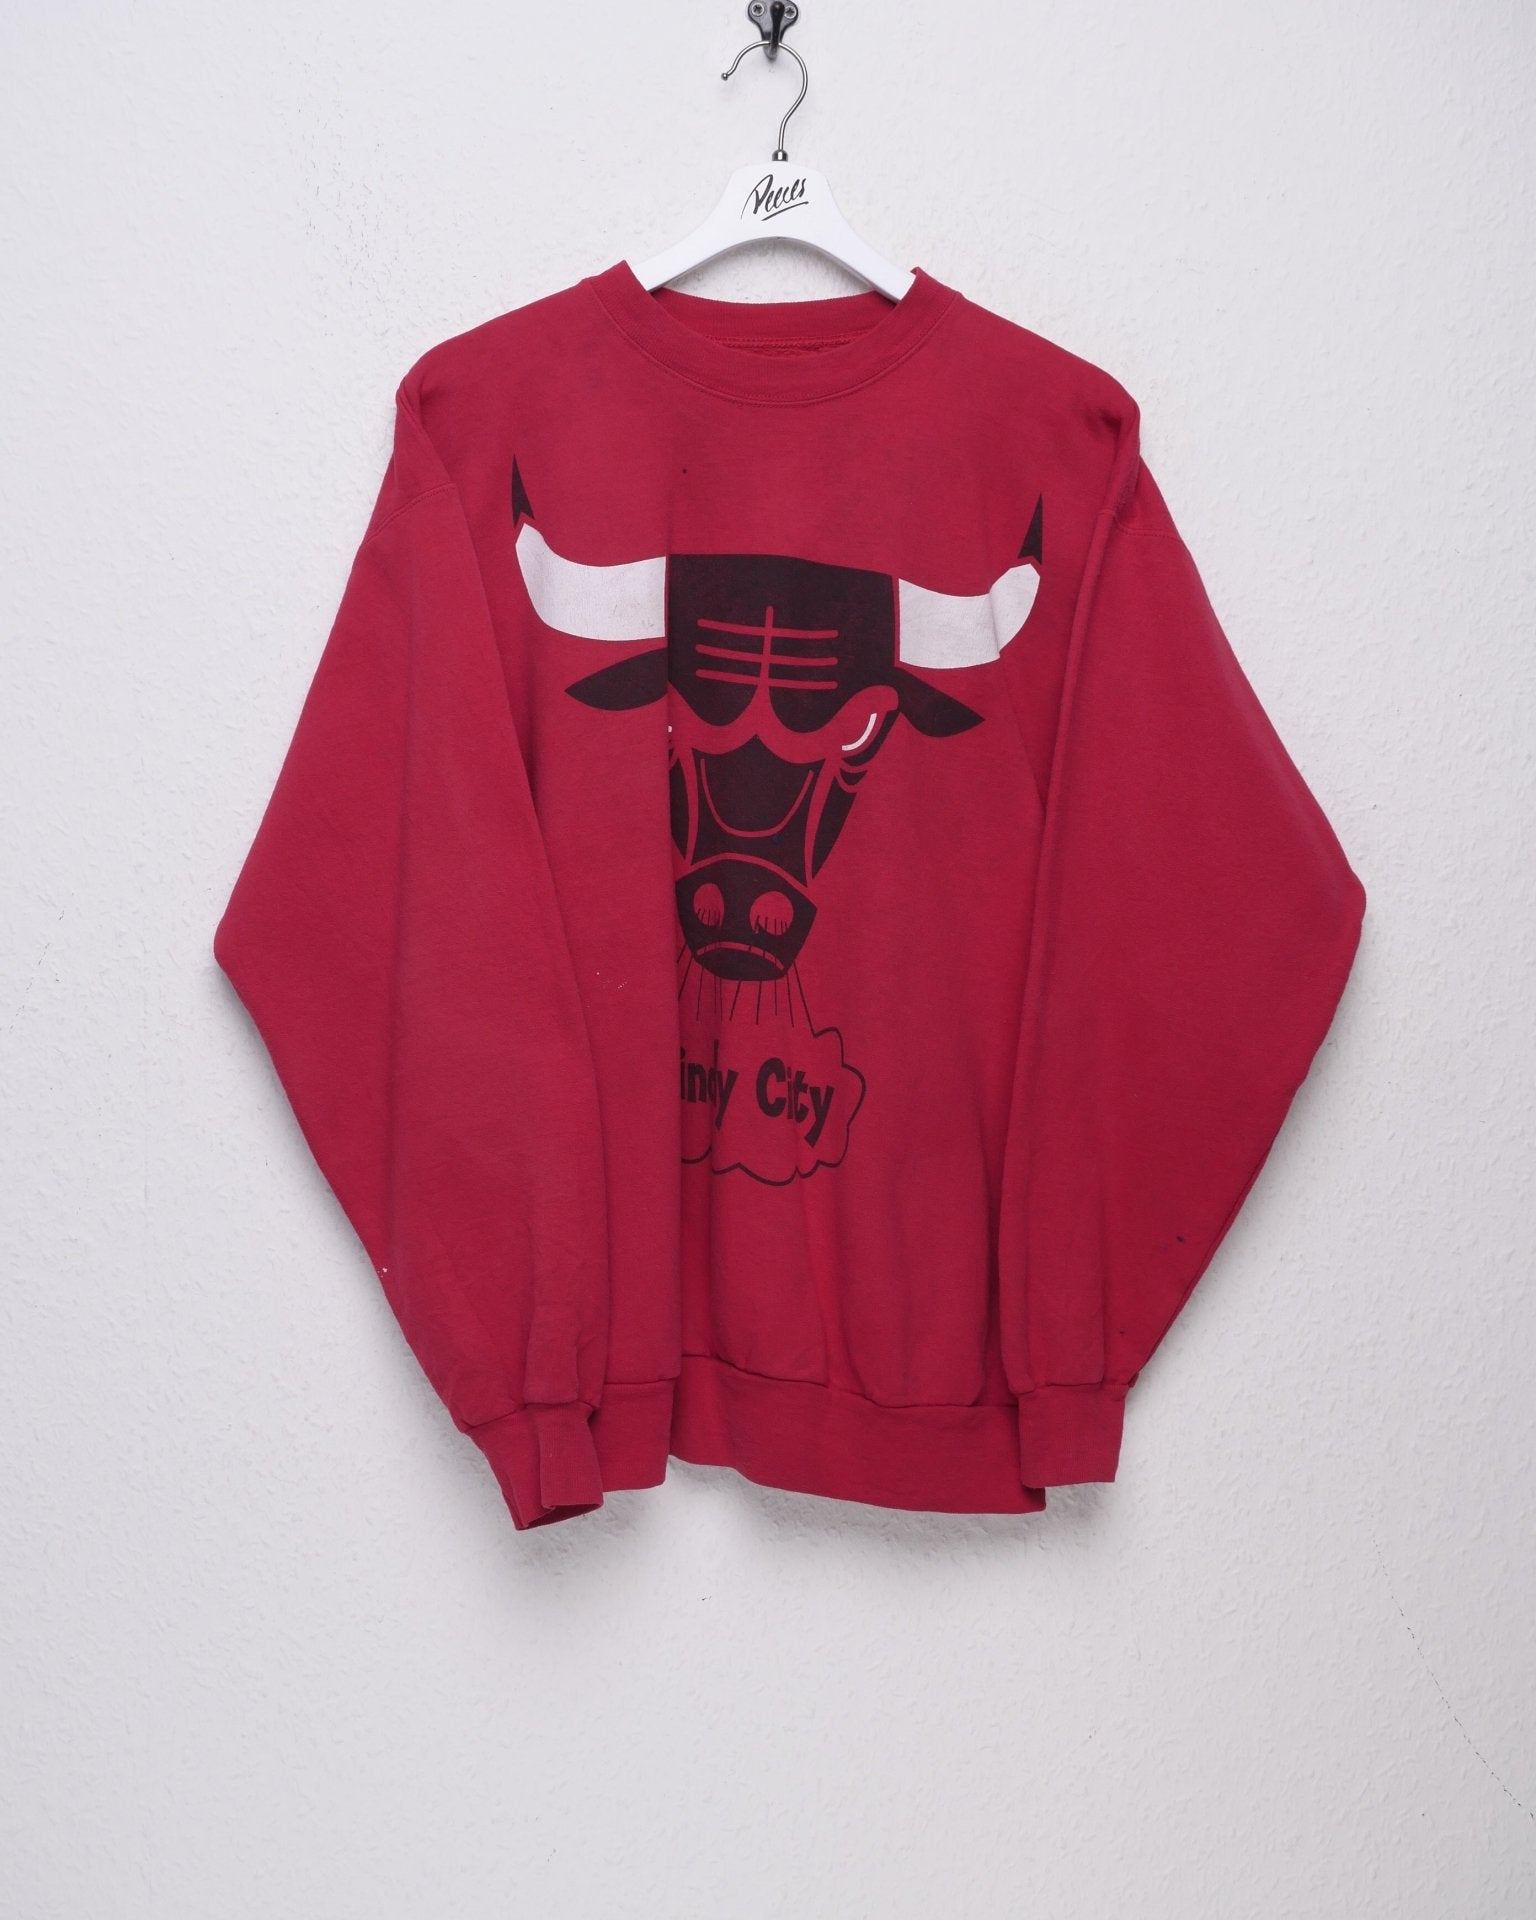 Windy City printed Graphic red Sweater - Peeces